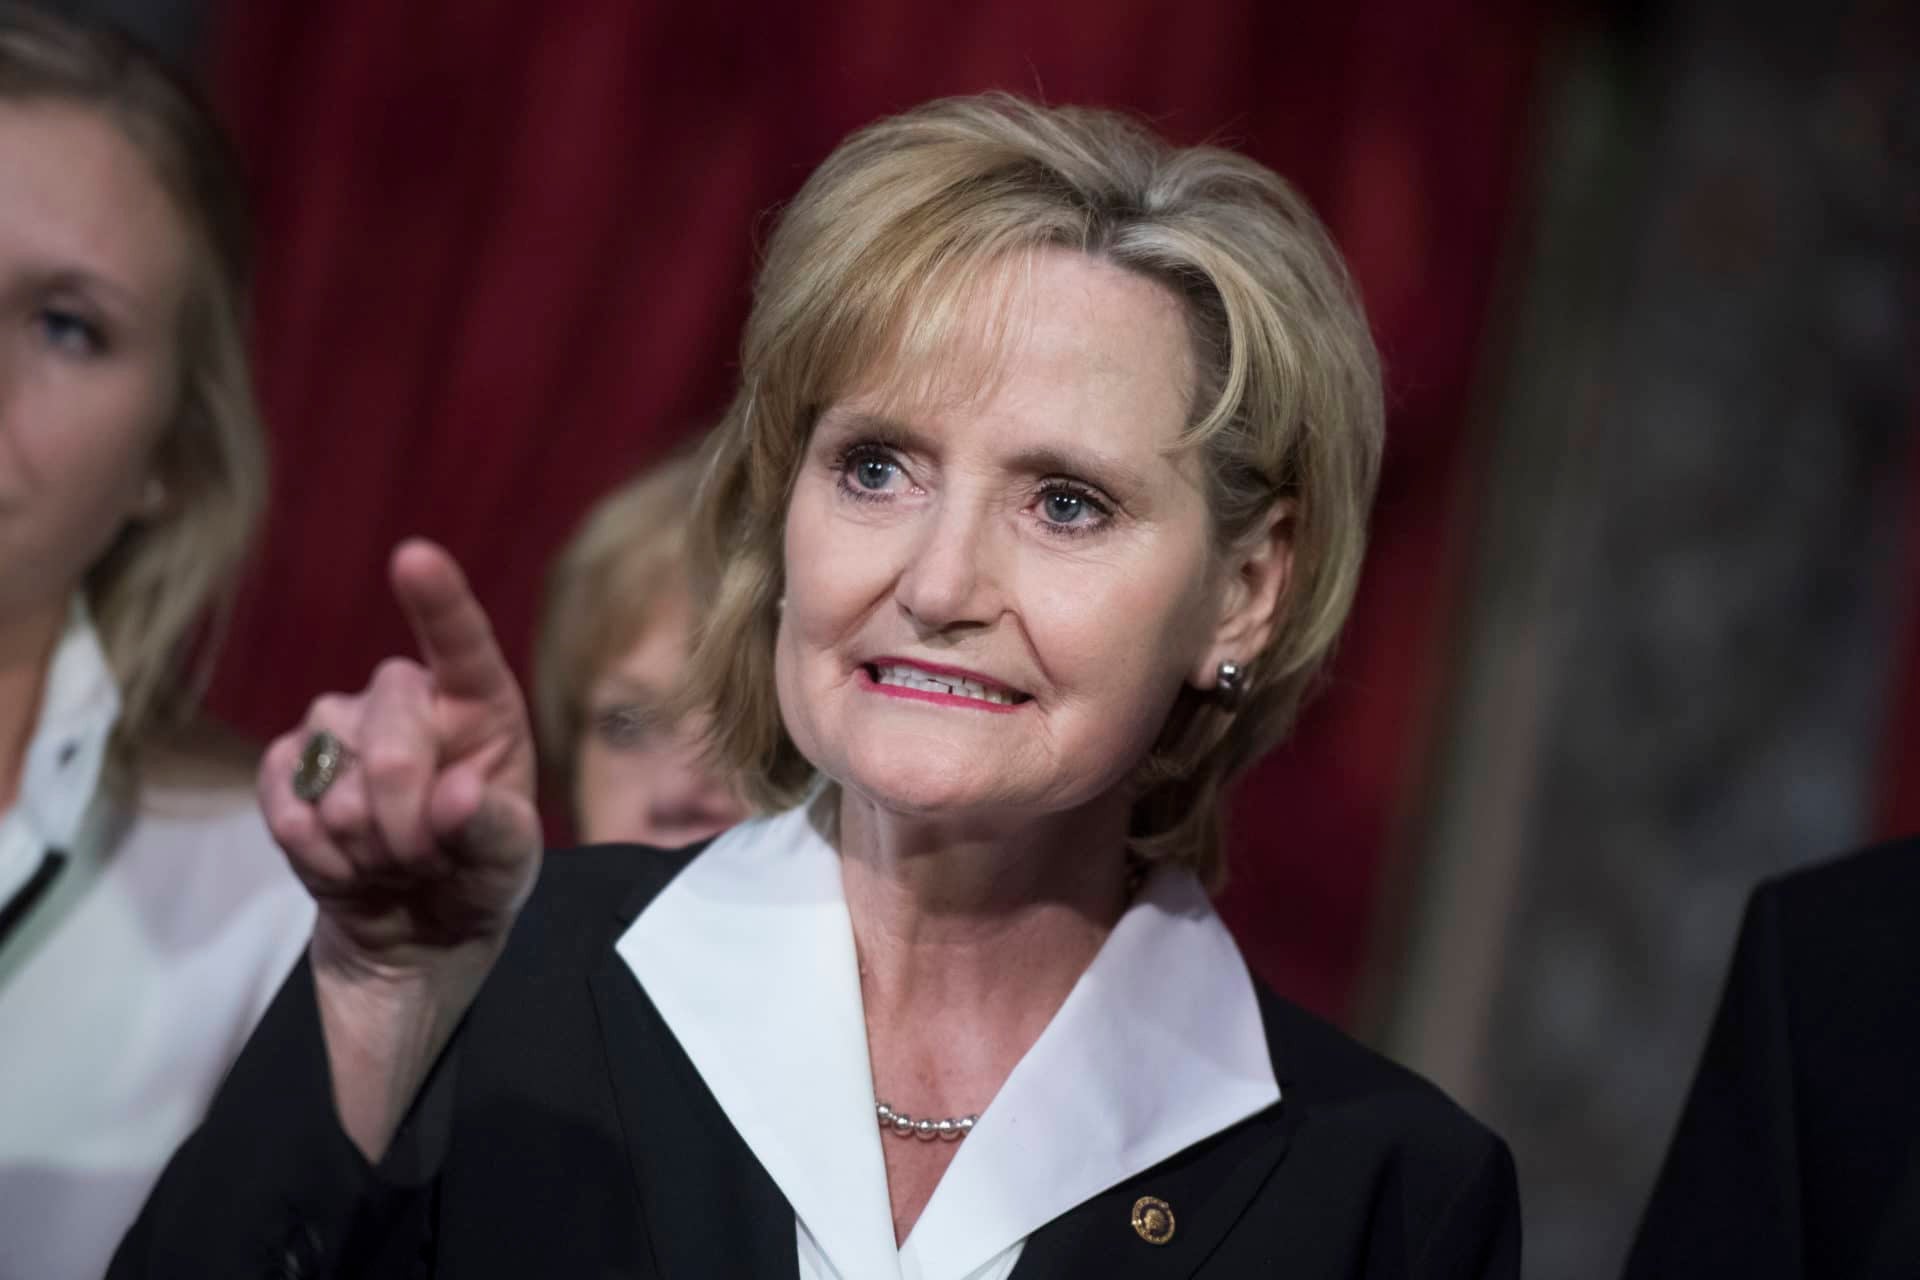 Mississippi Senator Apologizes To Those Offended by Her 'Public Hanging' Statement